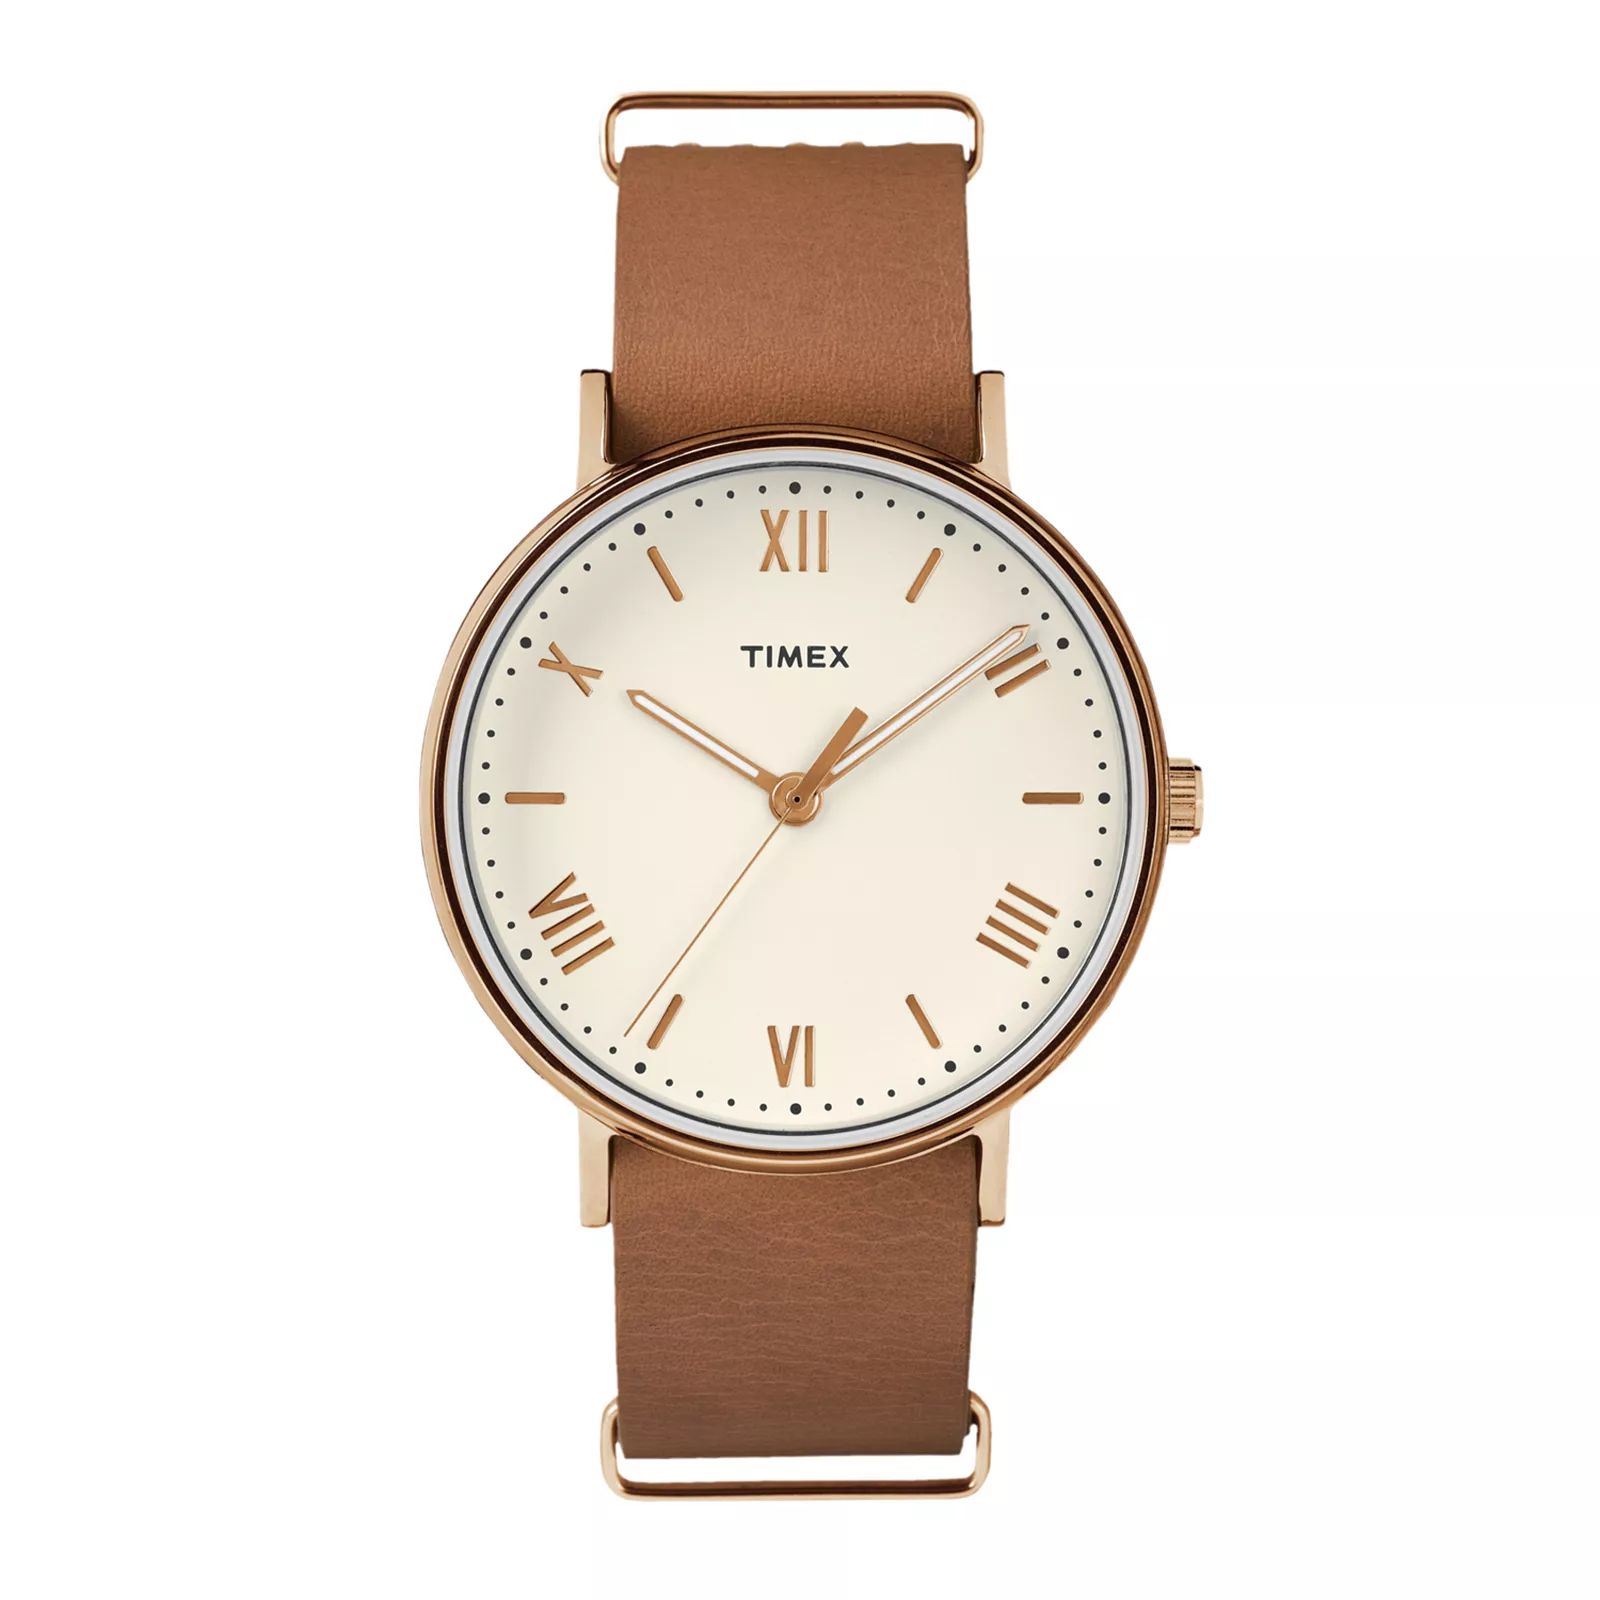 Timex Men's Southview Leather Watch - TW2R28800JT, Size: Large, Brown | Kohl's